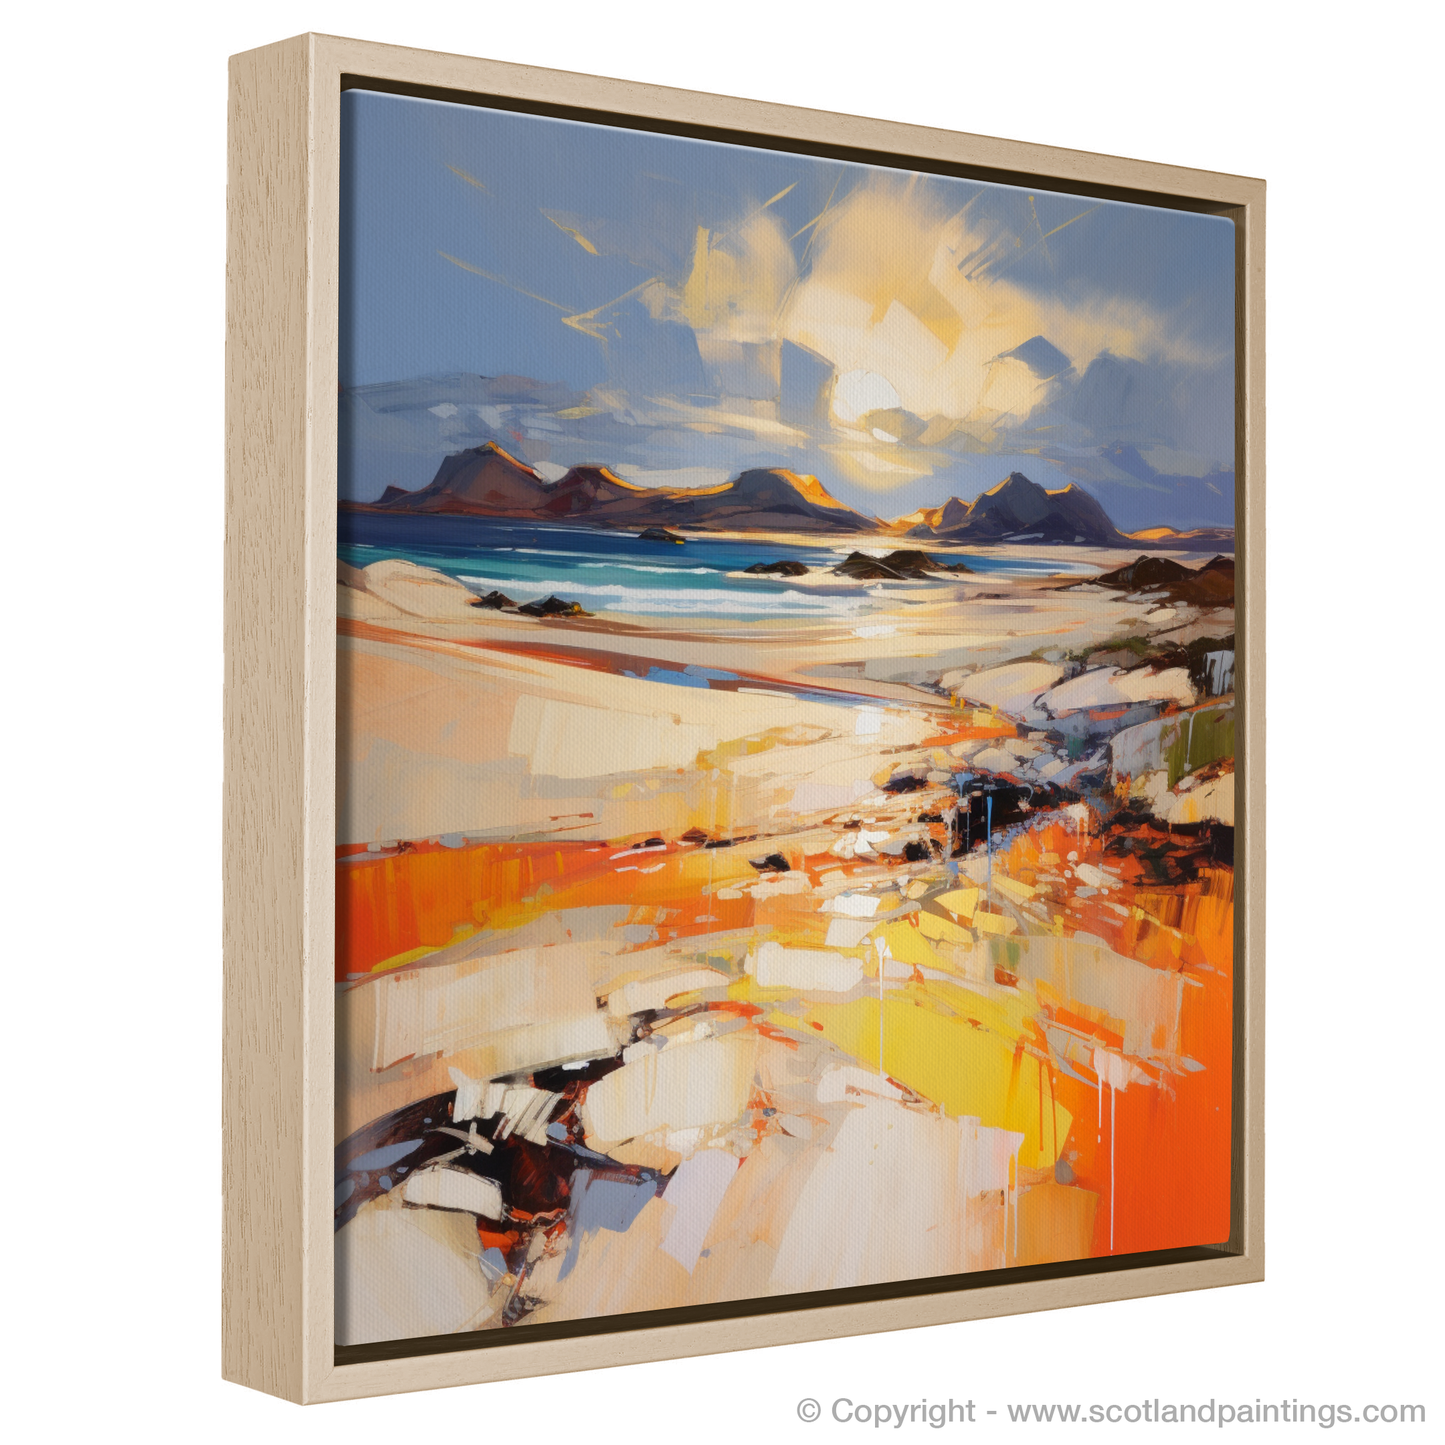 Painting and Art Print of Mellon Udrigle Beach at golden hour entitled "Golden Hour at Mellon Udrigle Beach: An Expressionist Tribute".